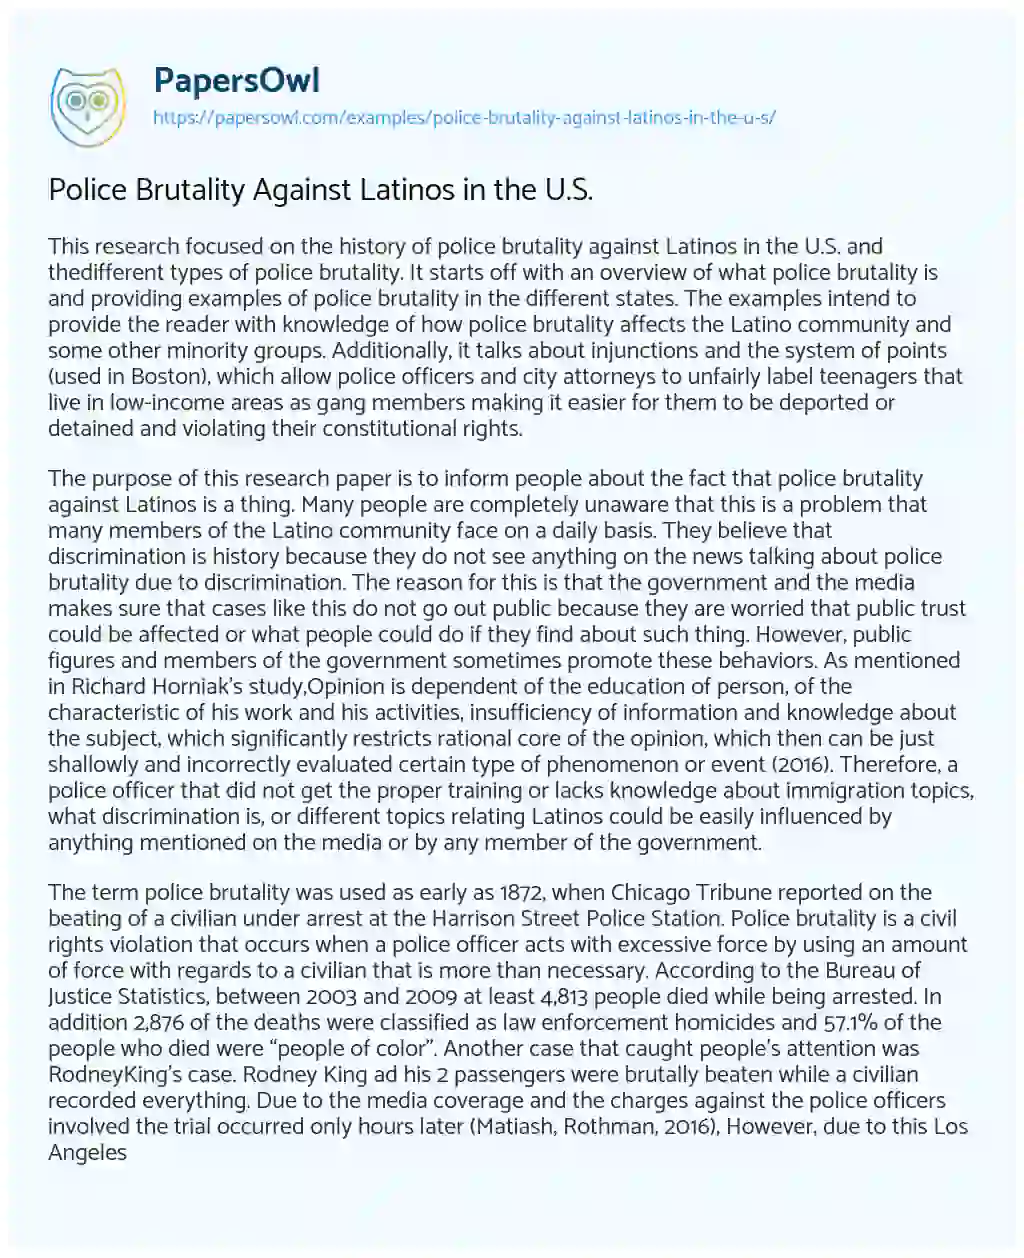 Police Brutality against Latinos in the U.S. essay